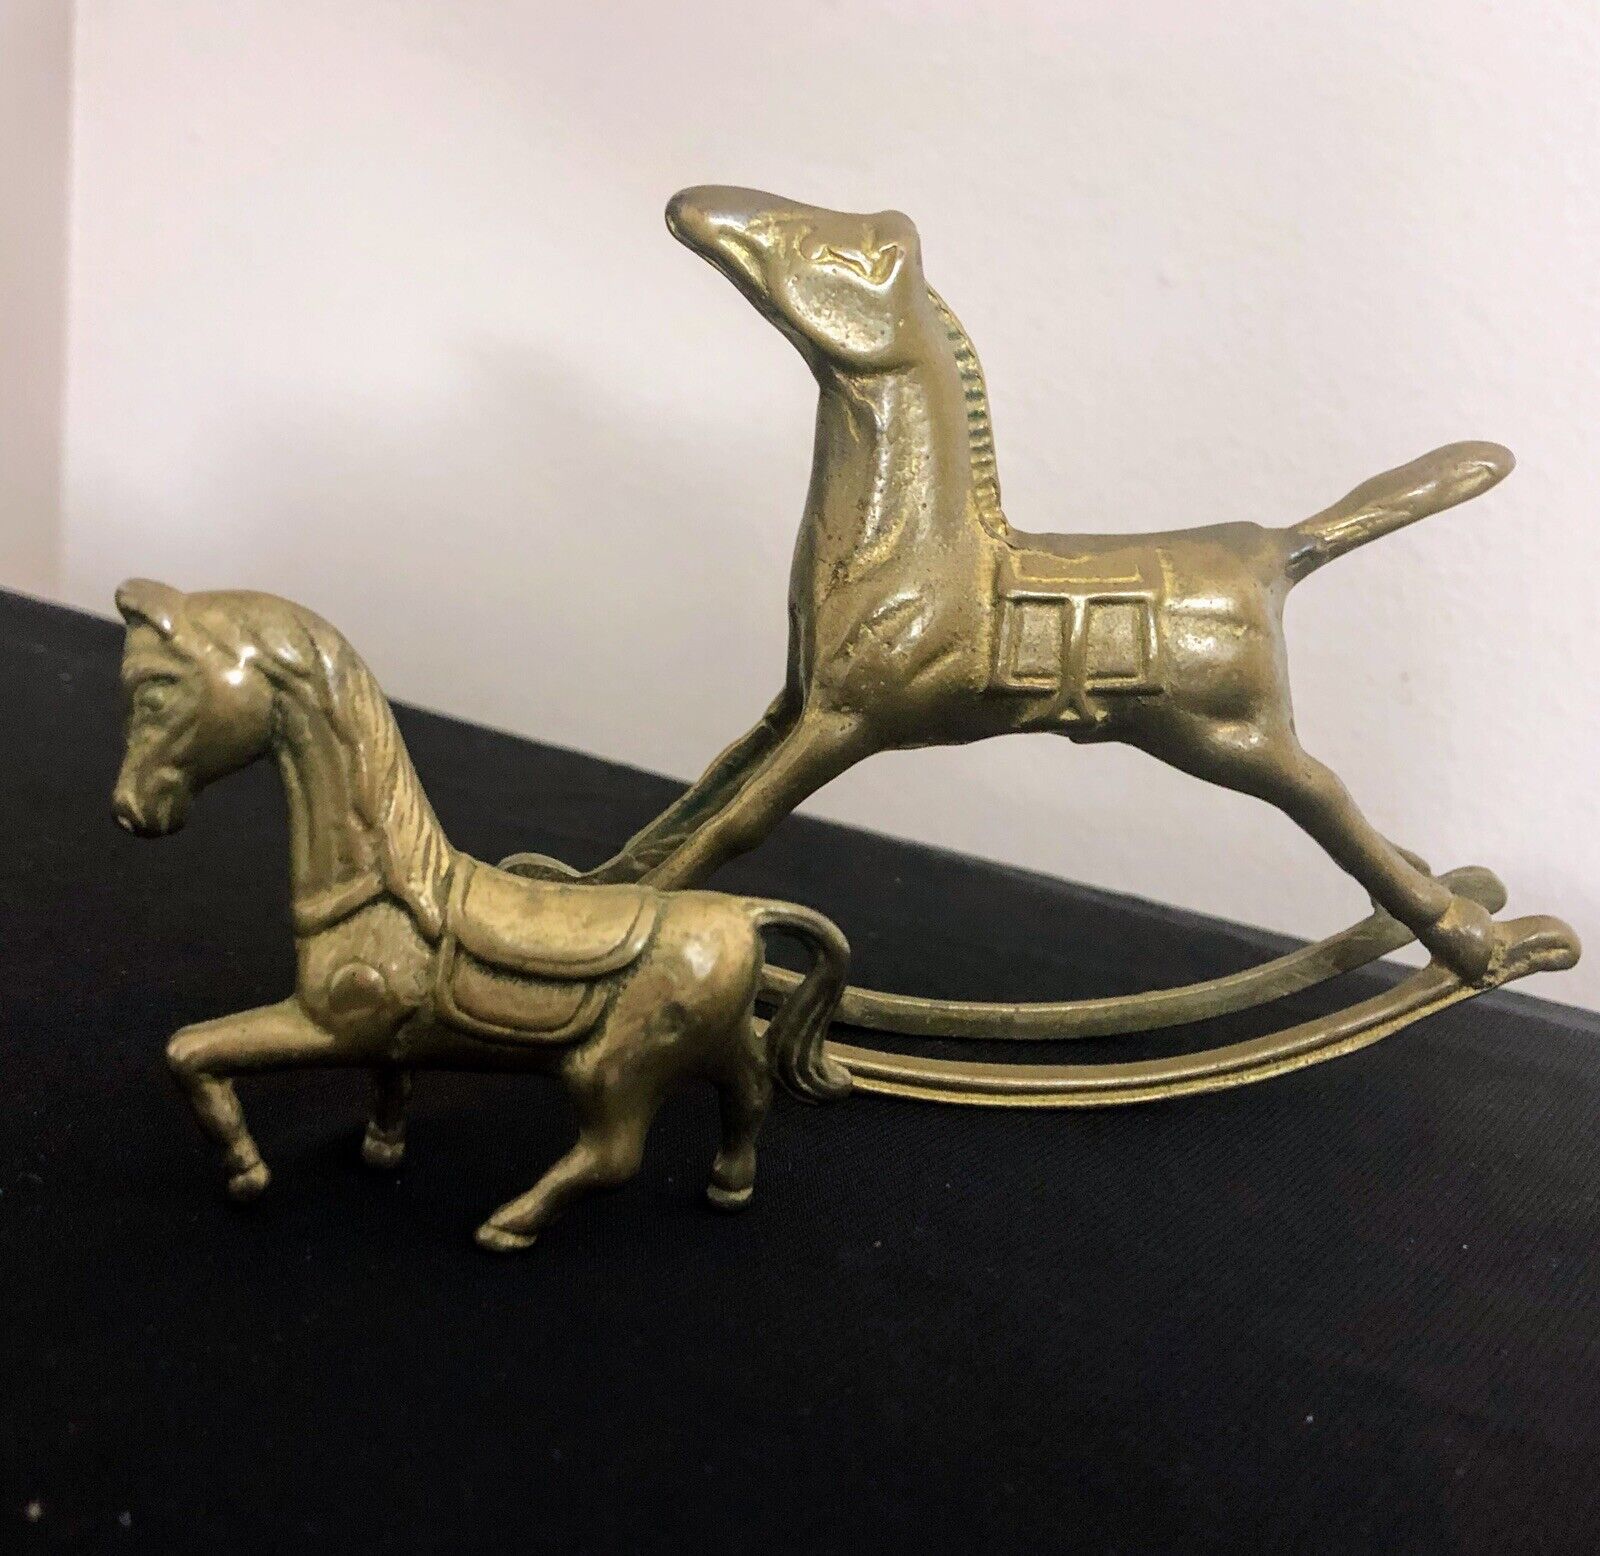 Lot of 2 Vintage Solid Brass Rocking Horse & Horse Figurines